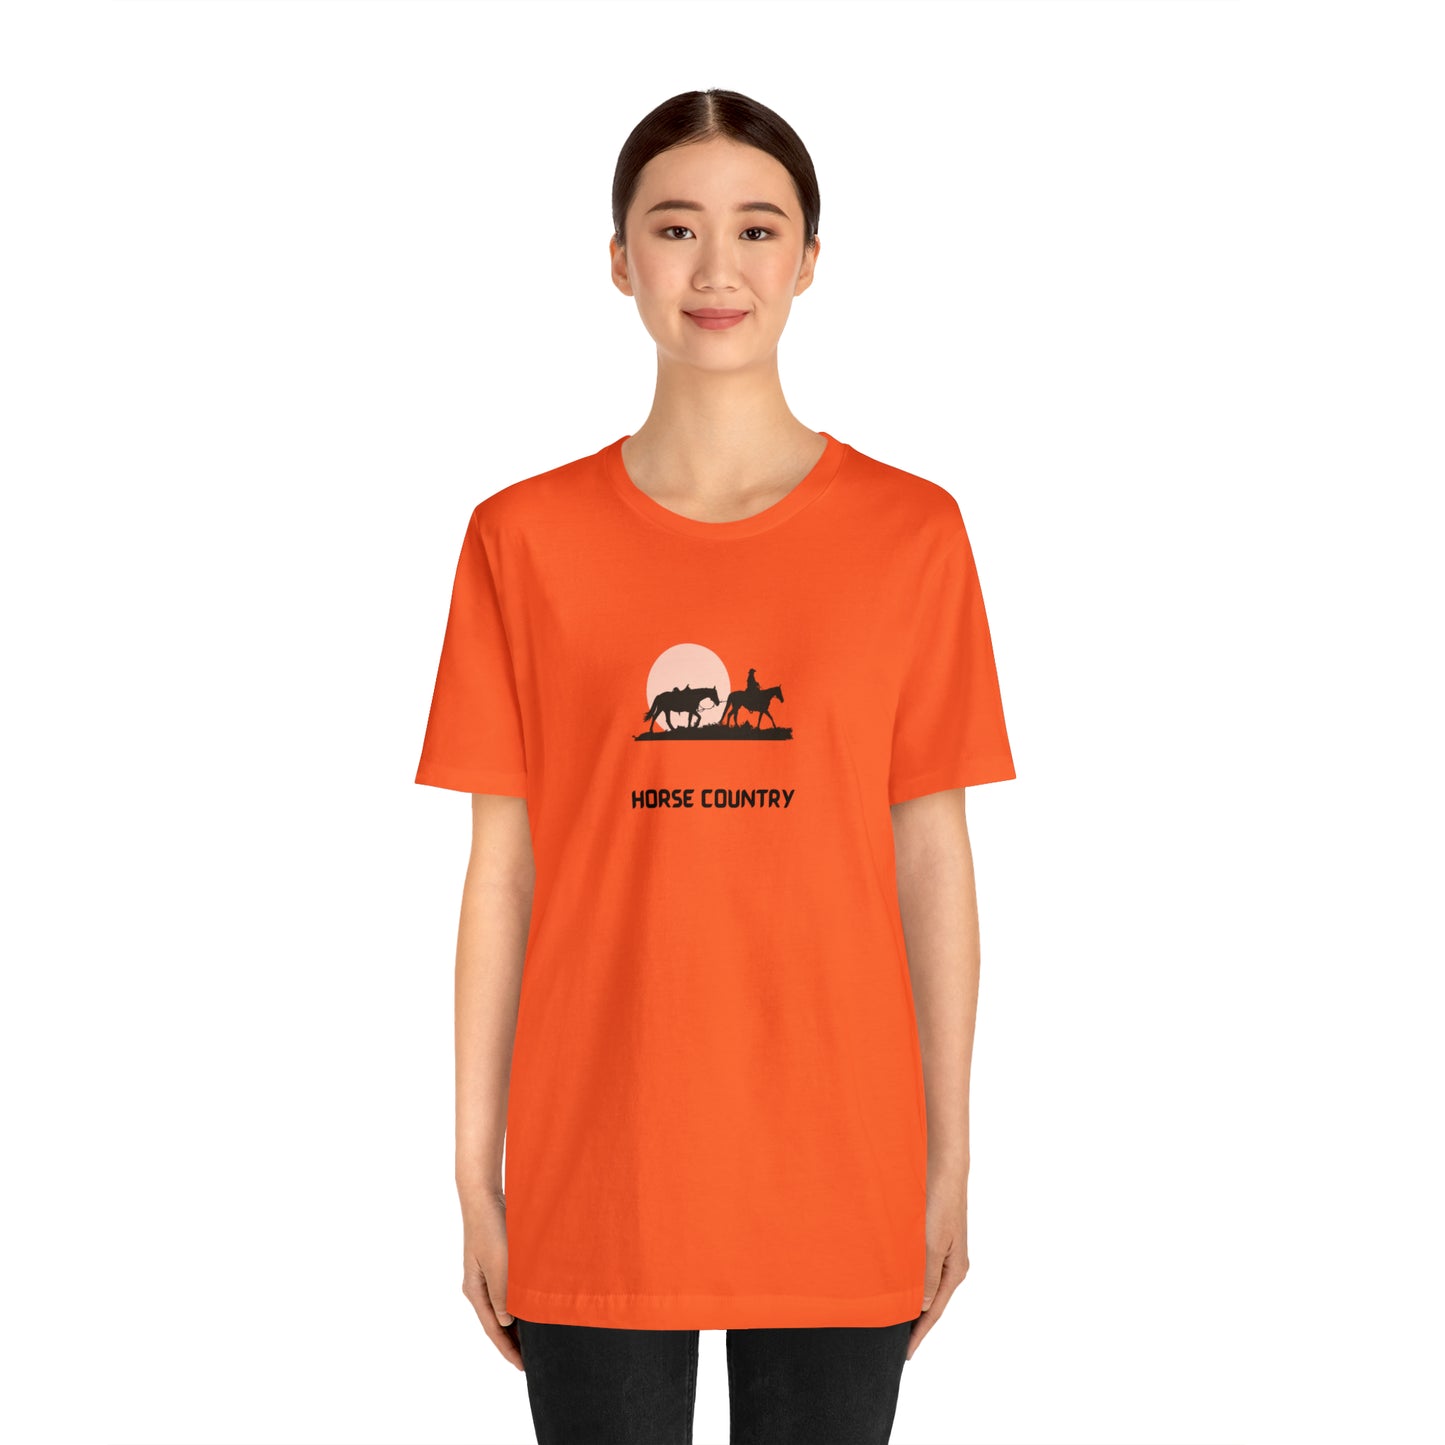 Horse Country Unisex Jersey Short Sleeve Tee